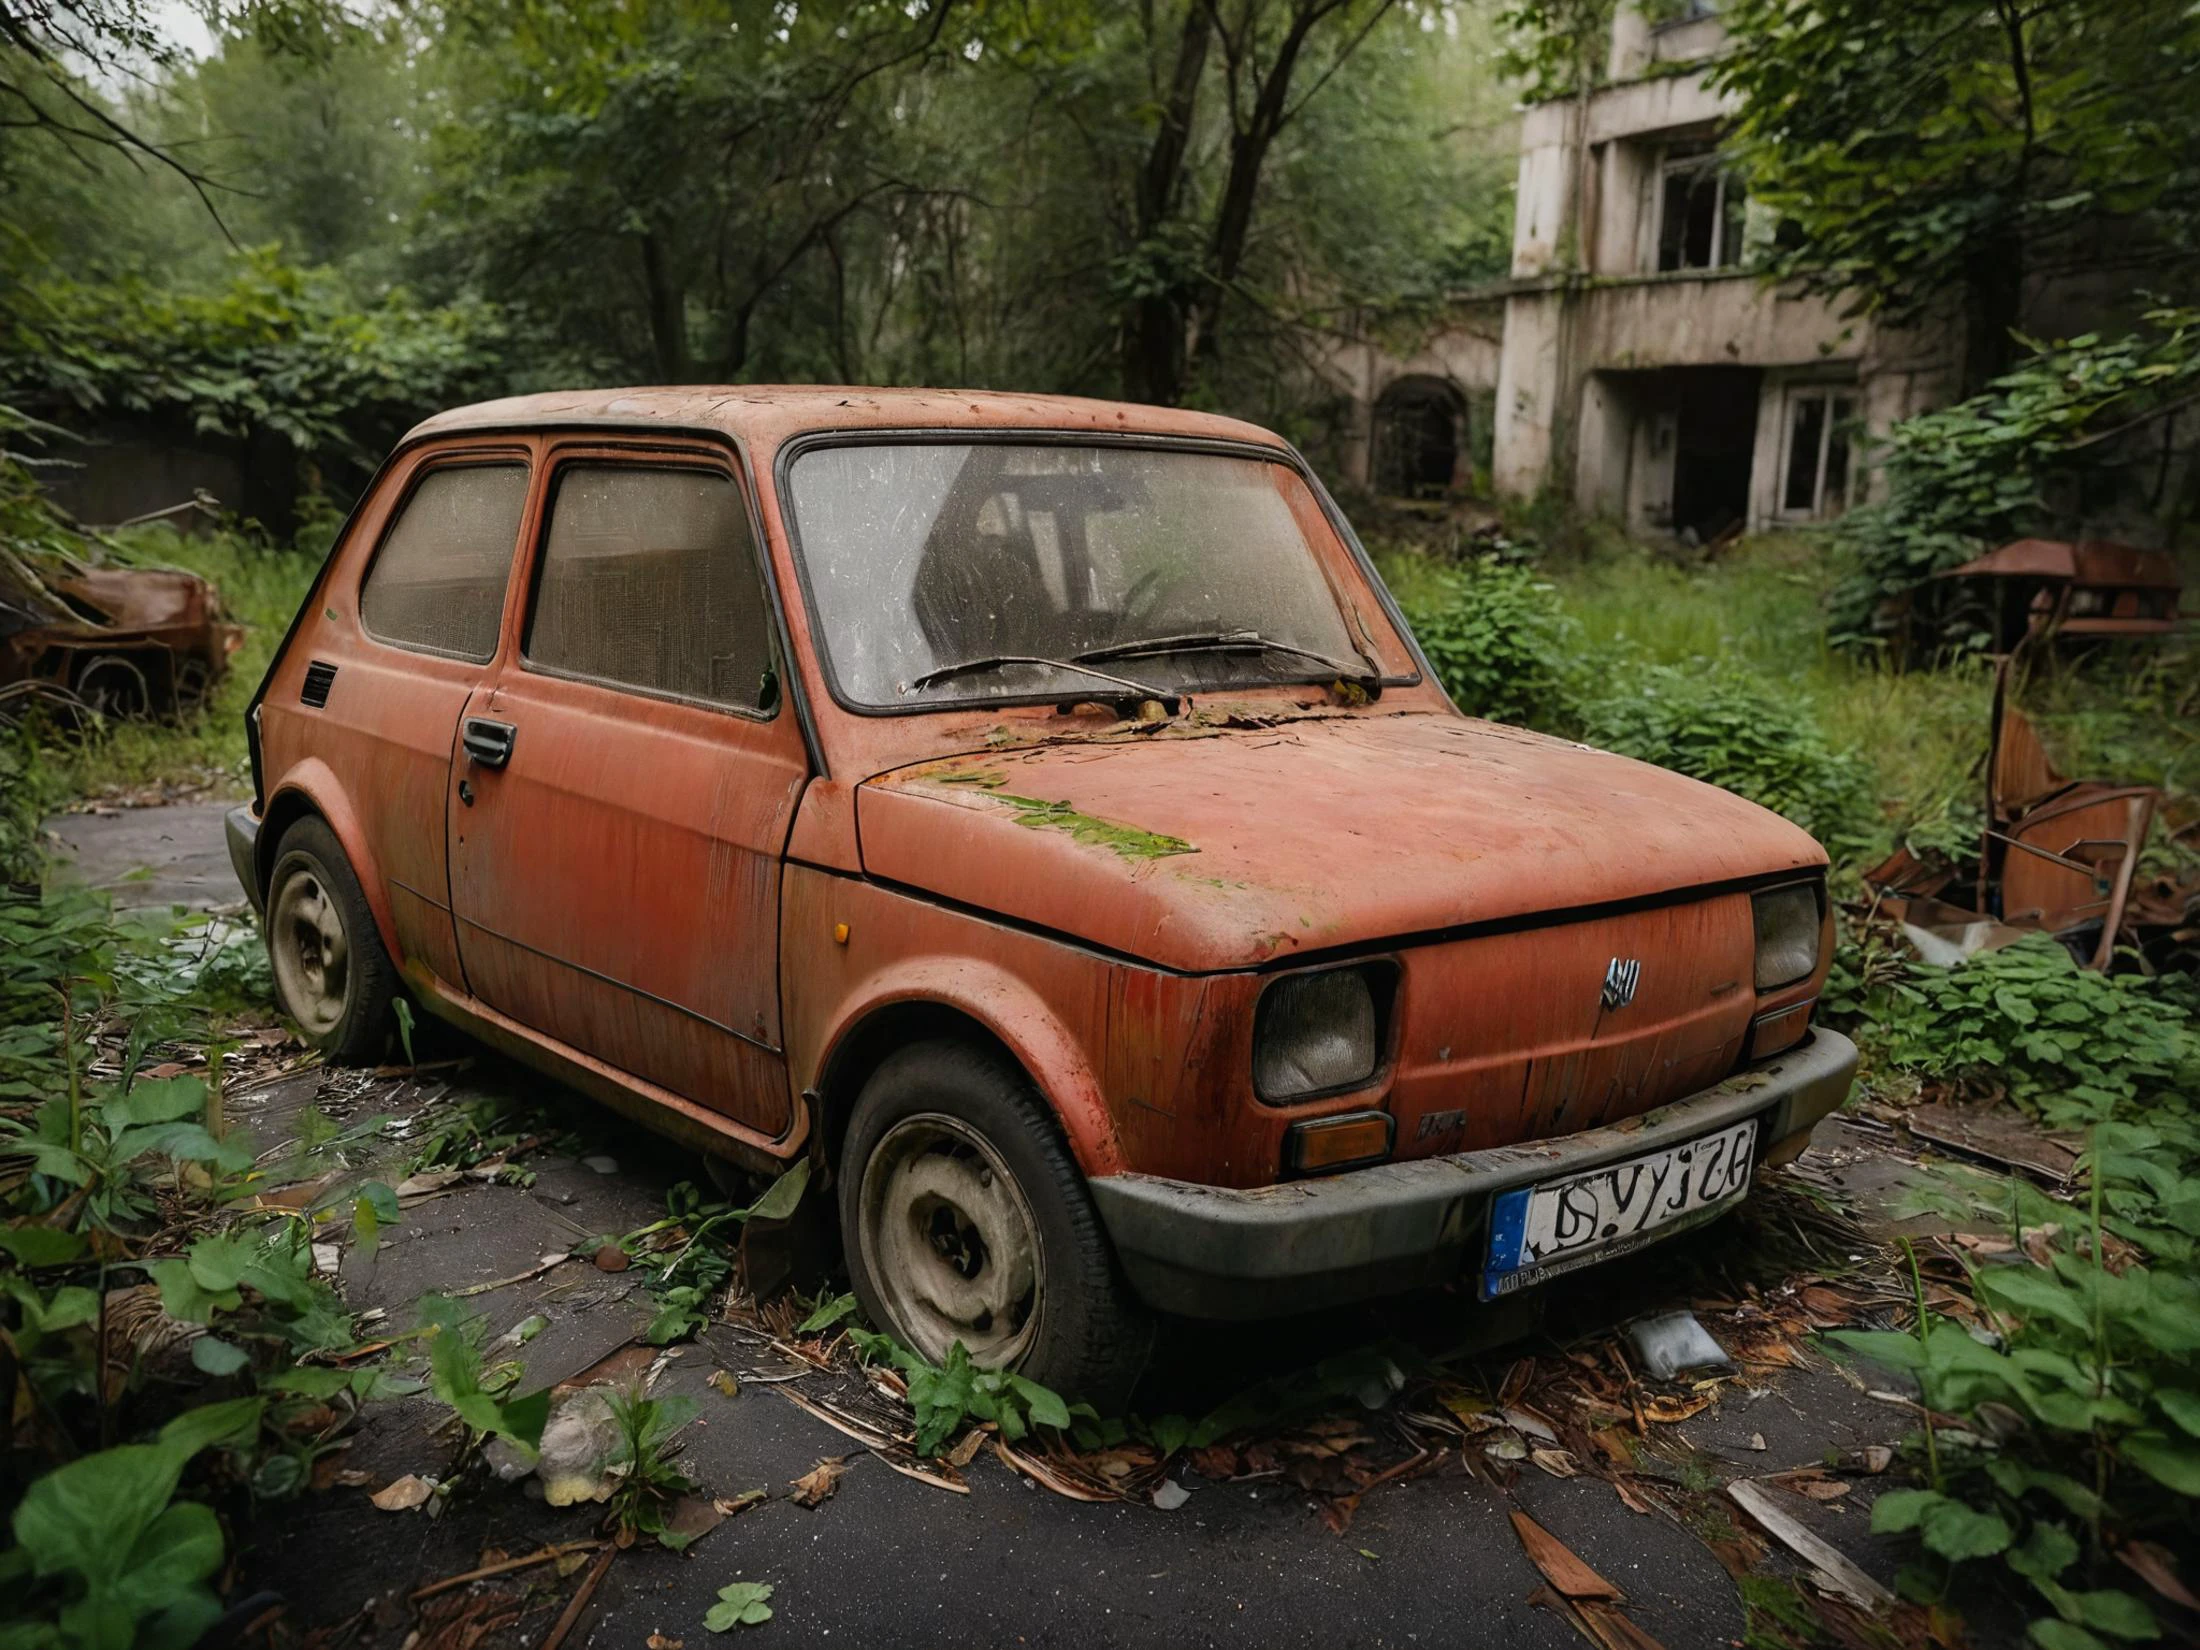 breathtaking cinematic photo cinematic film still abandoned and neglected red dusty  polish 70s compact car in an overgrown parking lot, in the blurry background an abandoned and ruined easter europe hotel from the 80s  a cloudy gray day, a car in the center of the shot  ais-abandz . shallow depth of field, vignette, highly detailed, high budget Hollywood movie, bokeh, cinemascope, moody, epic, gorgeous, film grain, grainy . 35mm photograph, film, bokeh, professional, 4k, highly detailed . award-winning, professional, highly detailed